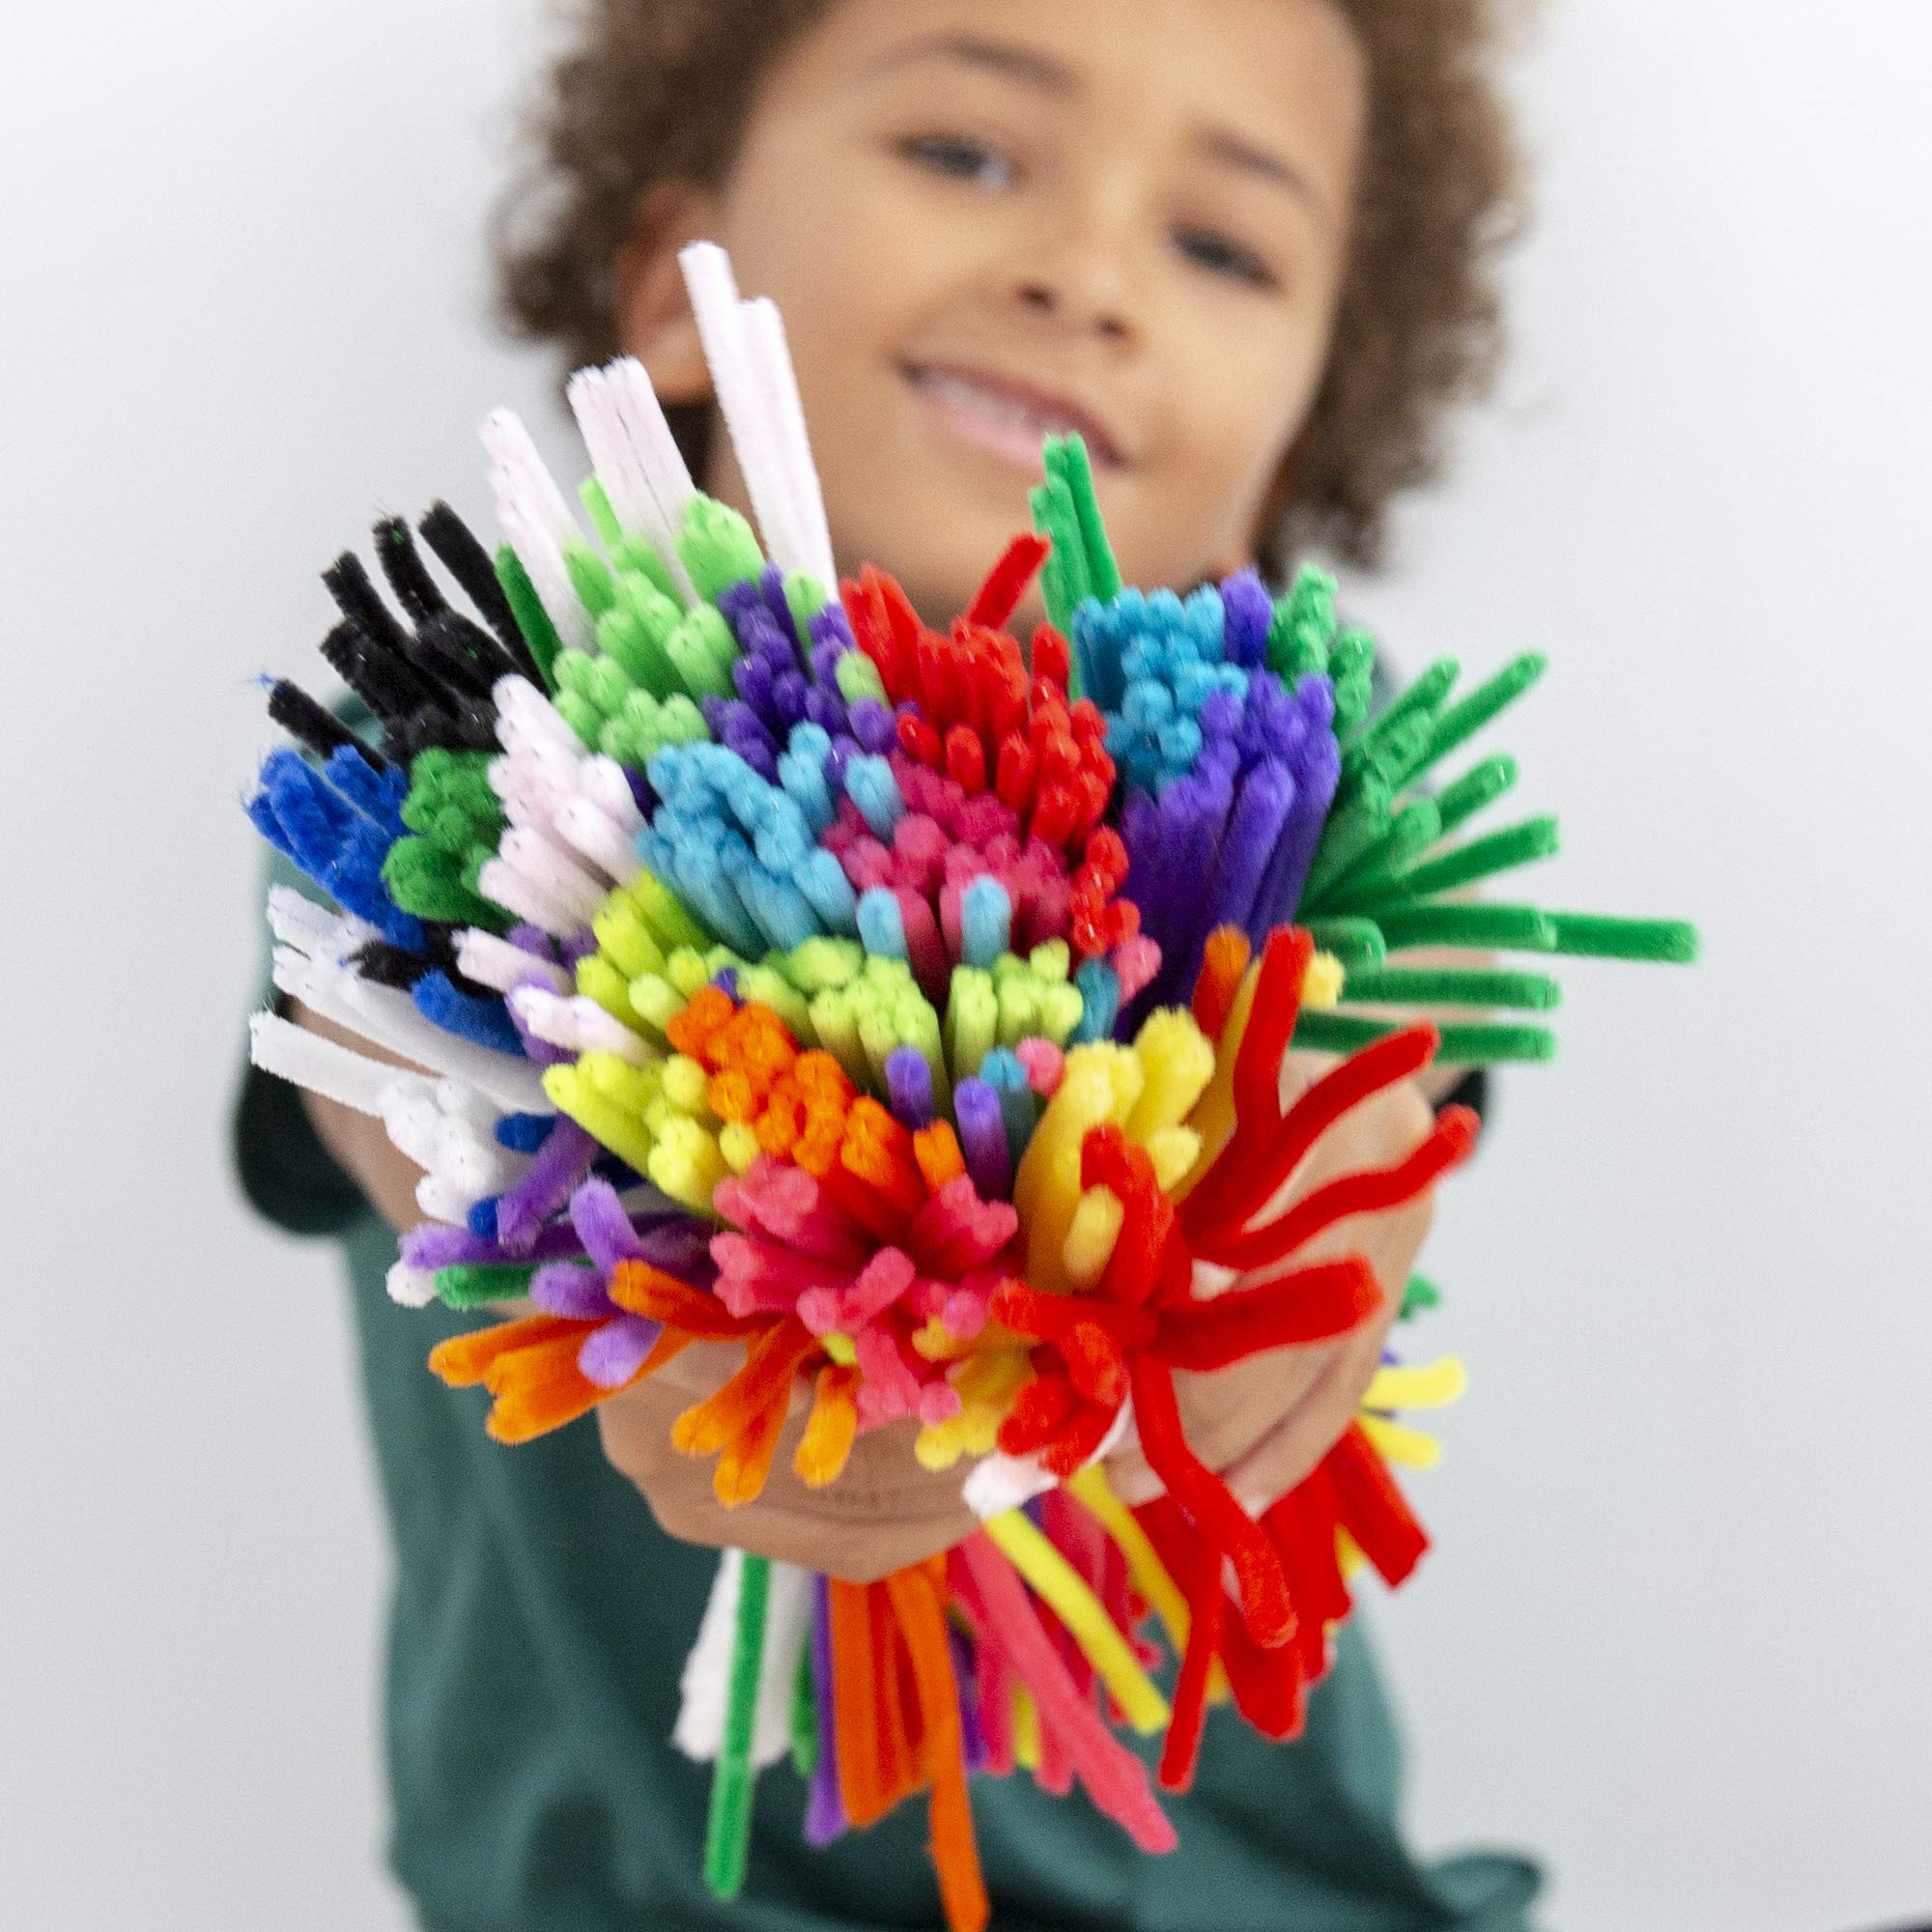 Horizon Group USA 200 Neon Fuzzy Sticks, Value Pack of Pipe Cleaners in 6 Colors, 12 Inches, Chenille Stems, Bendy Sticks, Great for DIY Arts & Crafts Projects, Classrooms & Craft Rooms